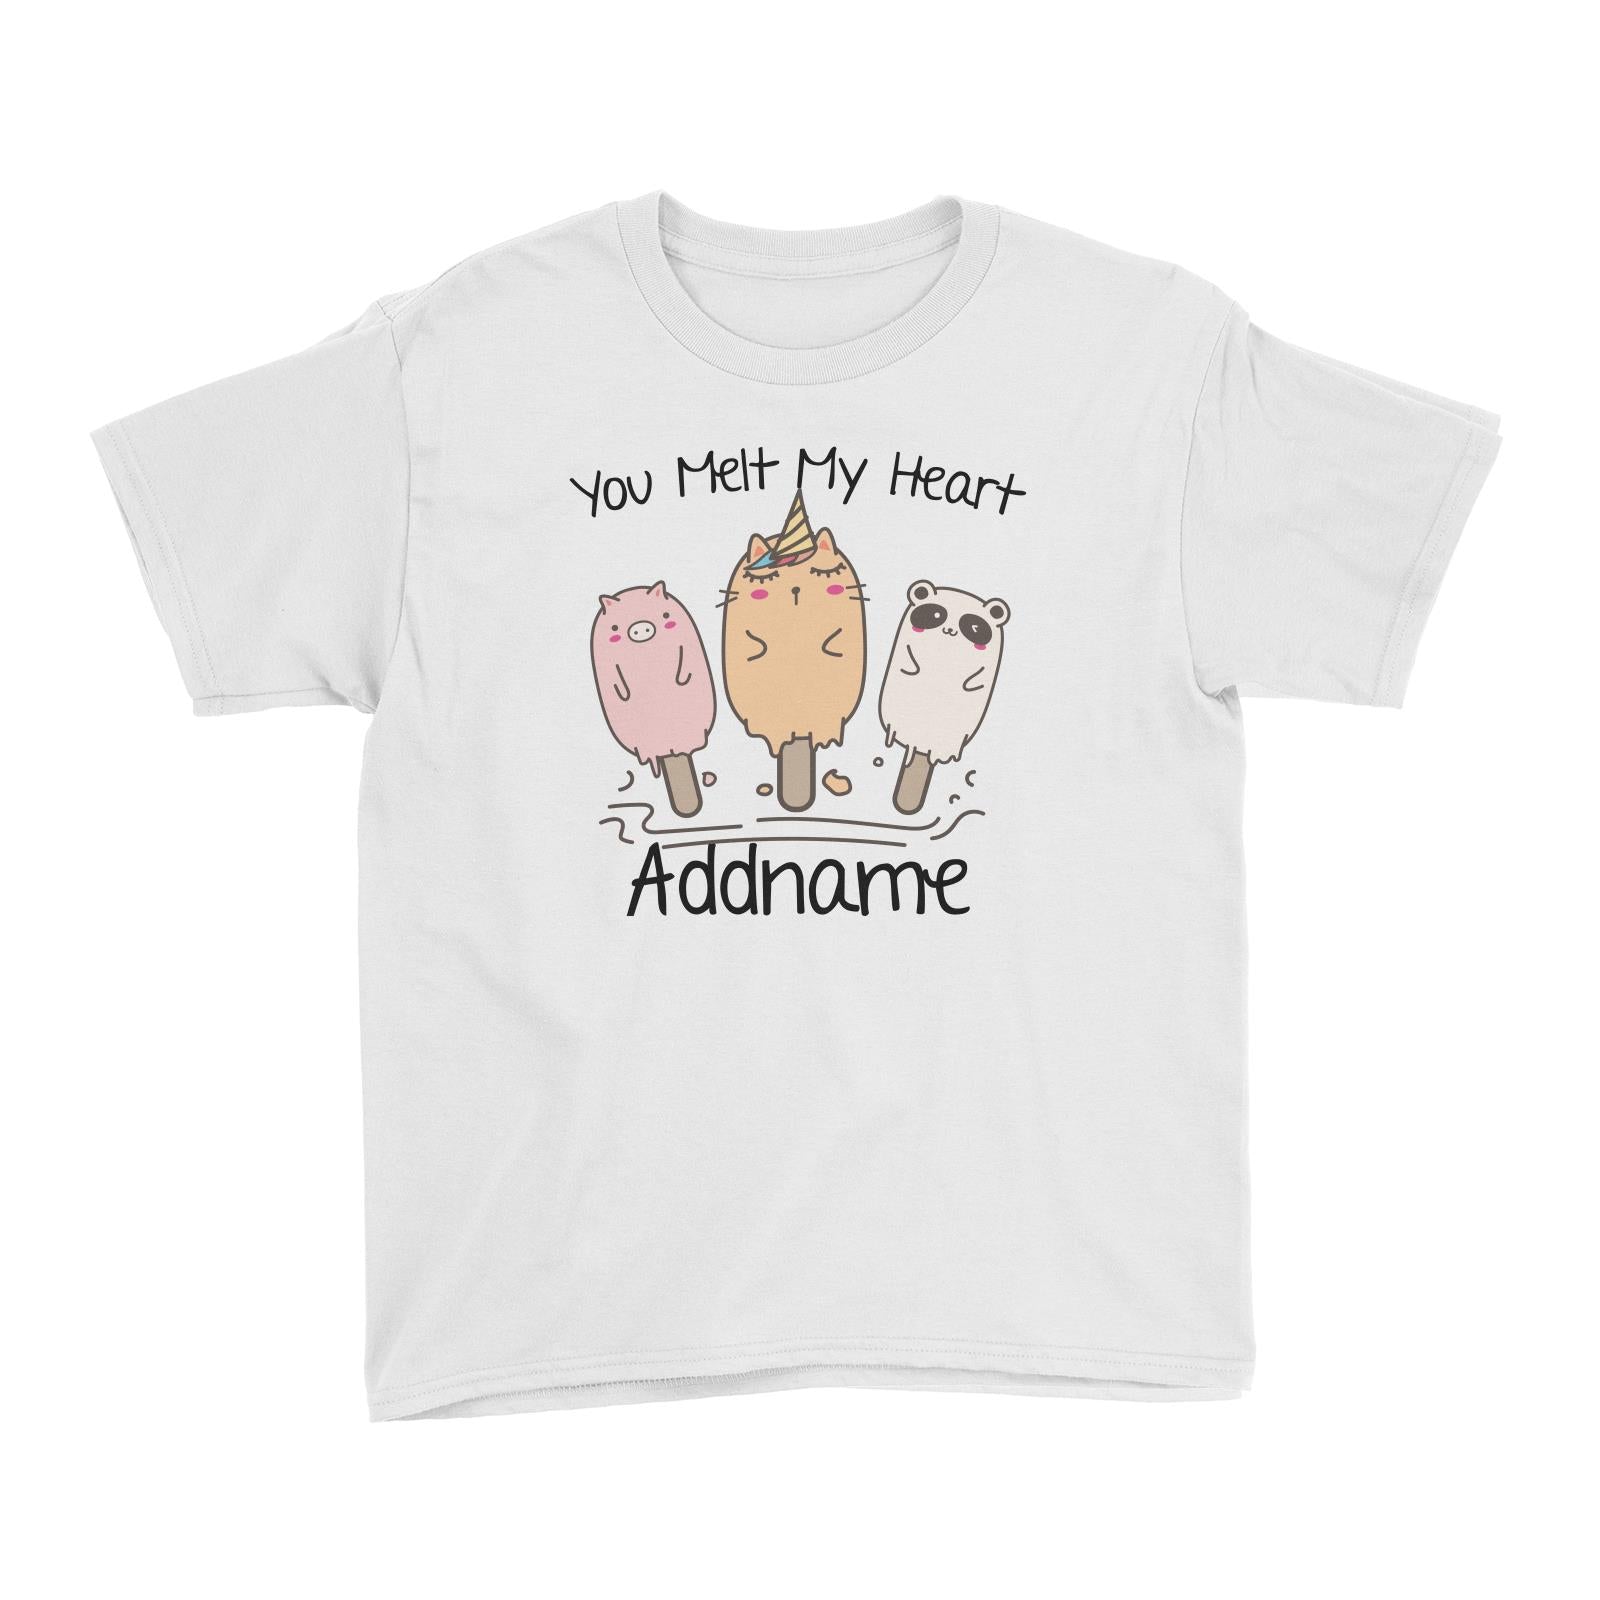 Cute Animals And Friends Series You Melt My Heart Animal Addname Kid's T-Shirt